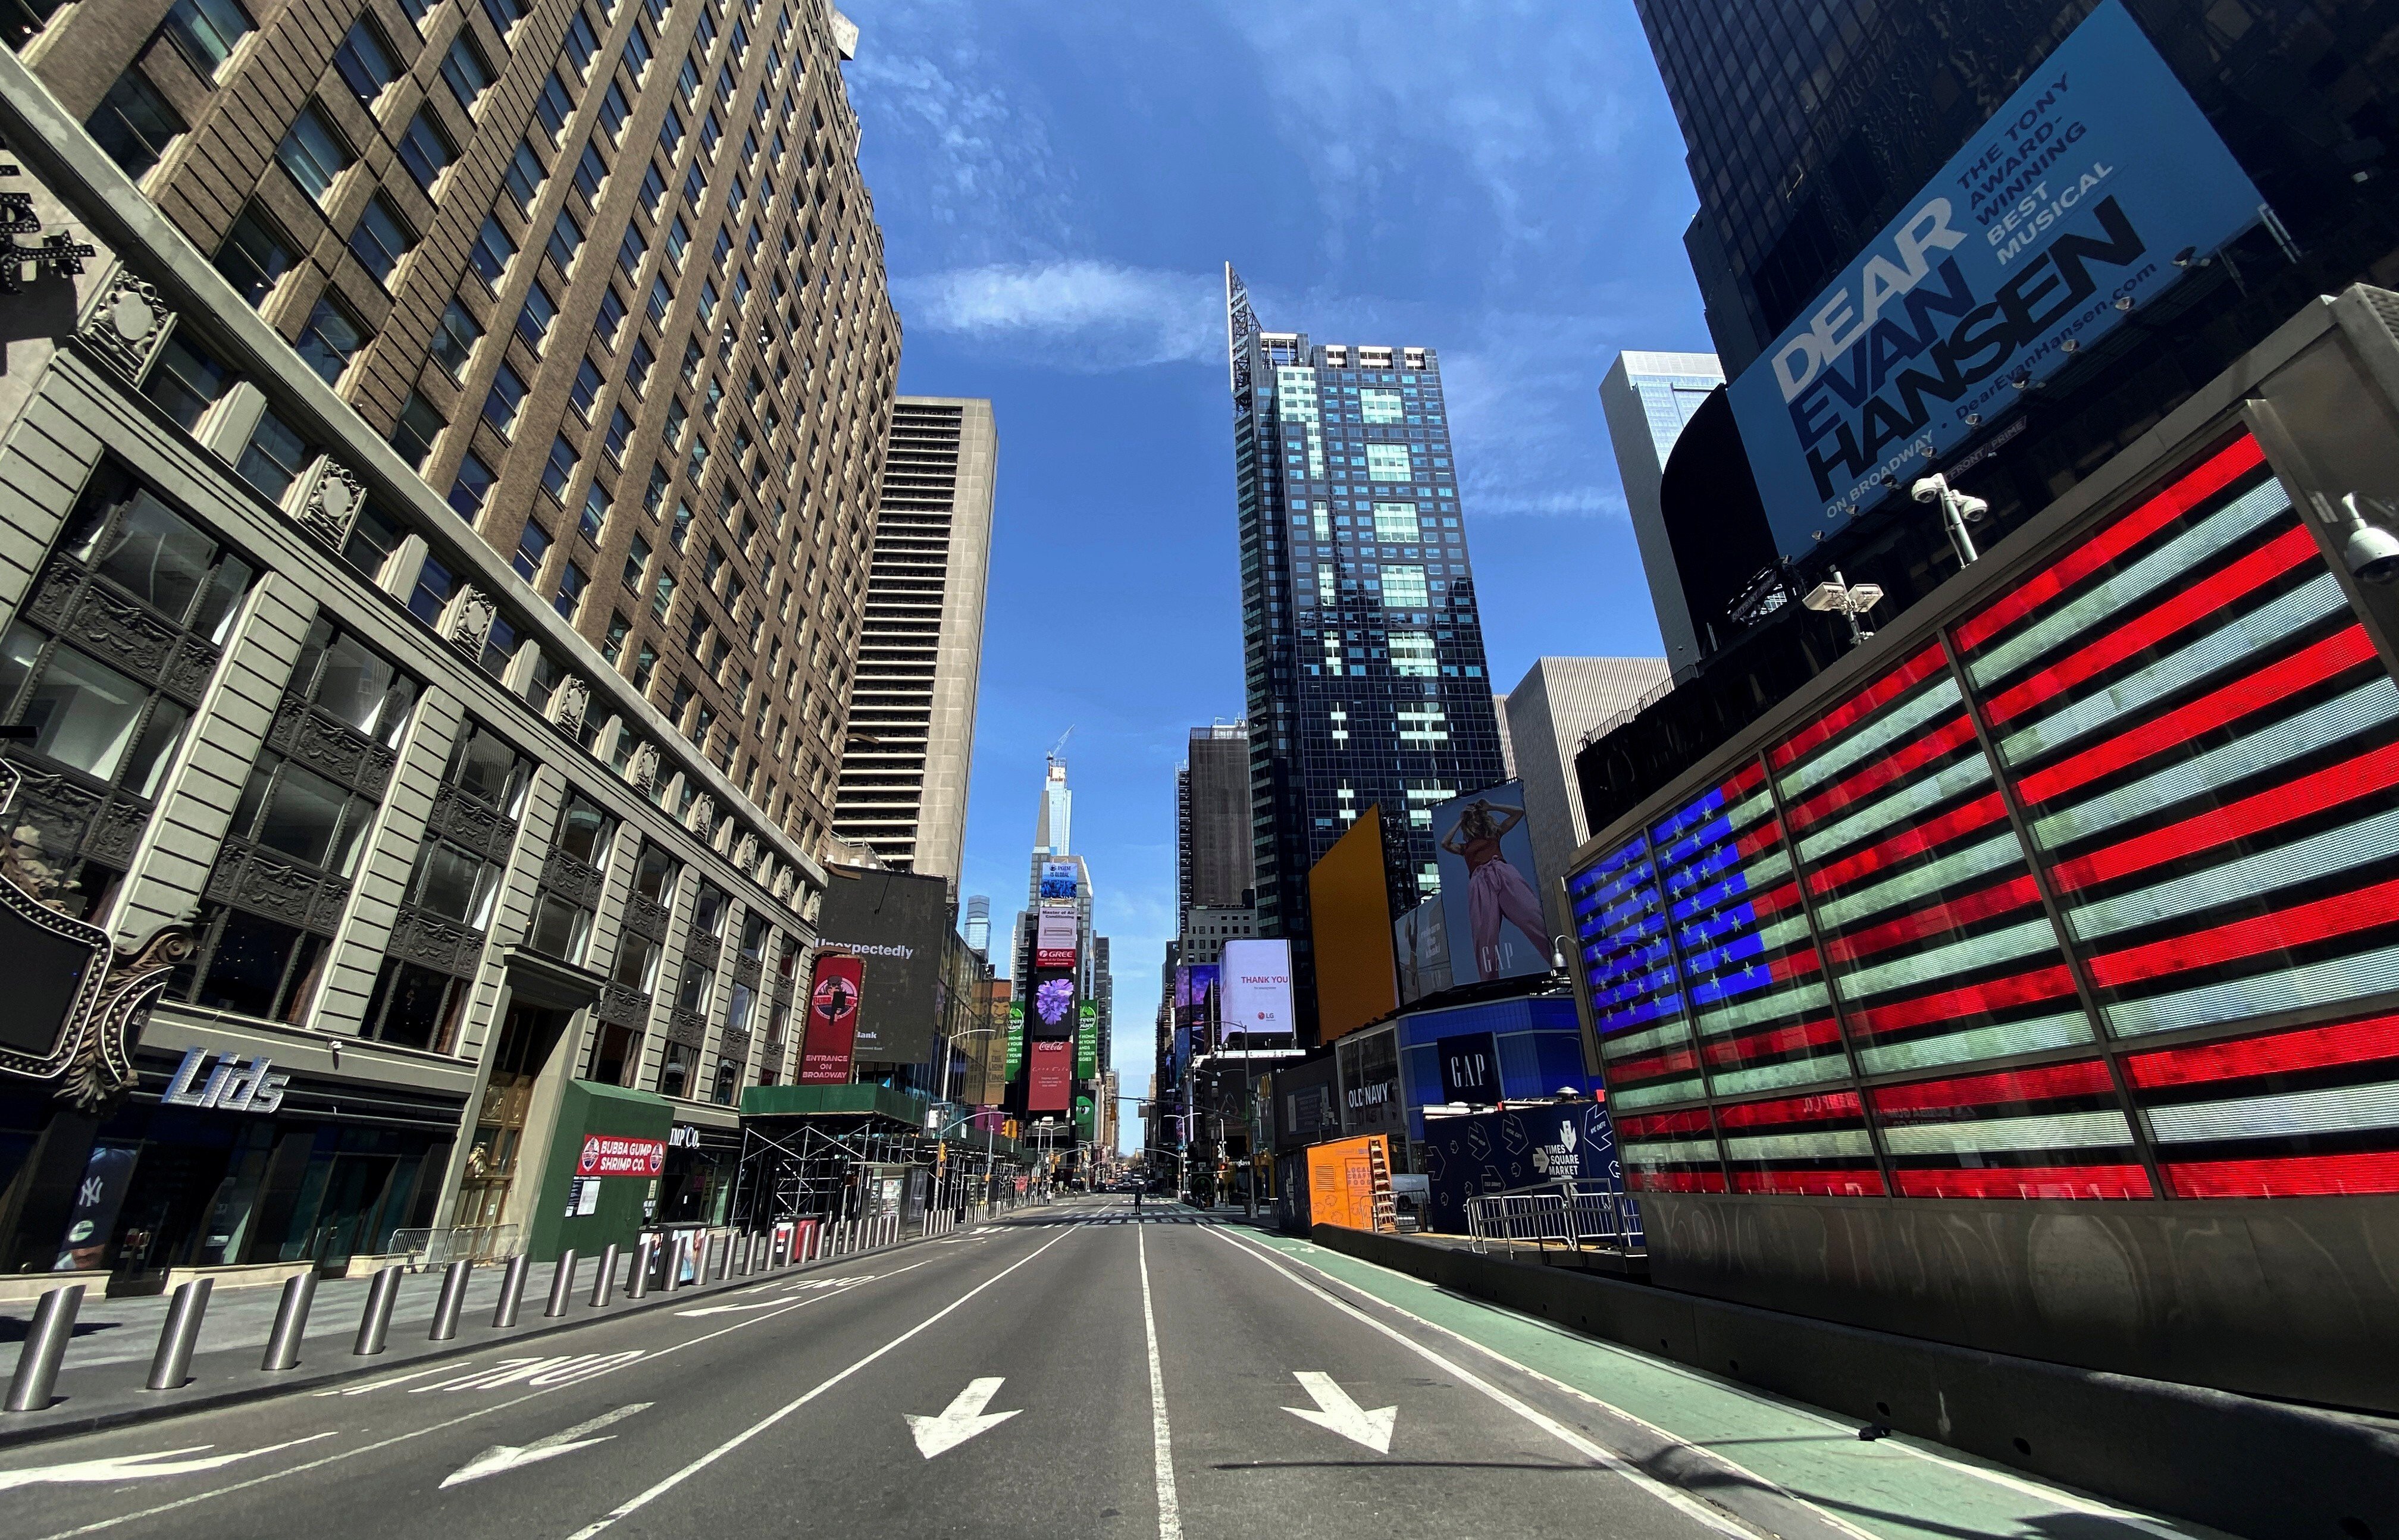 A nearly deserted street in Times Square on Tuesday. Photo: Reuters